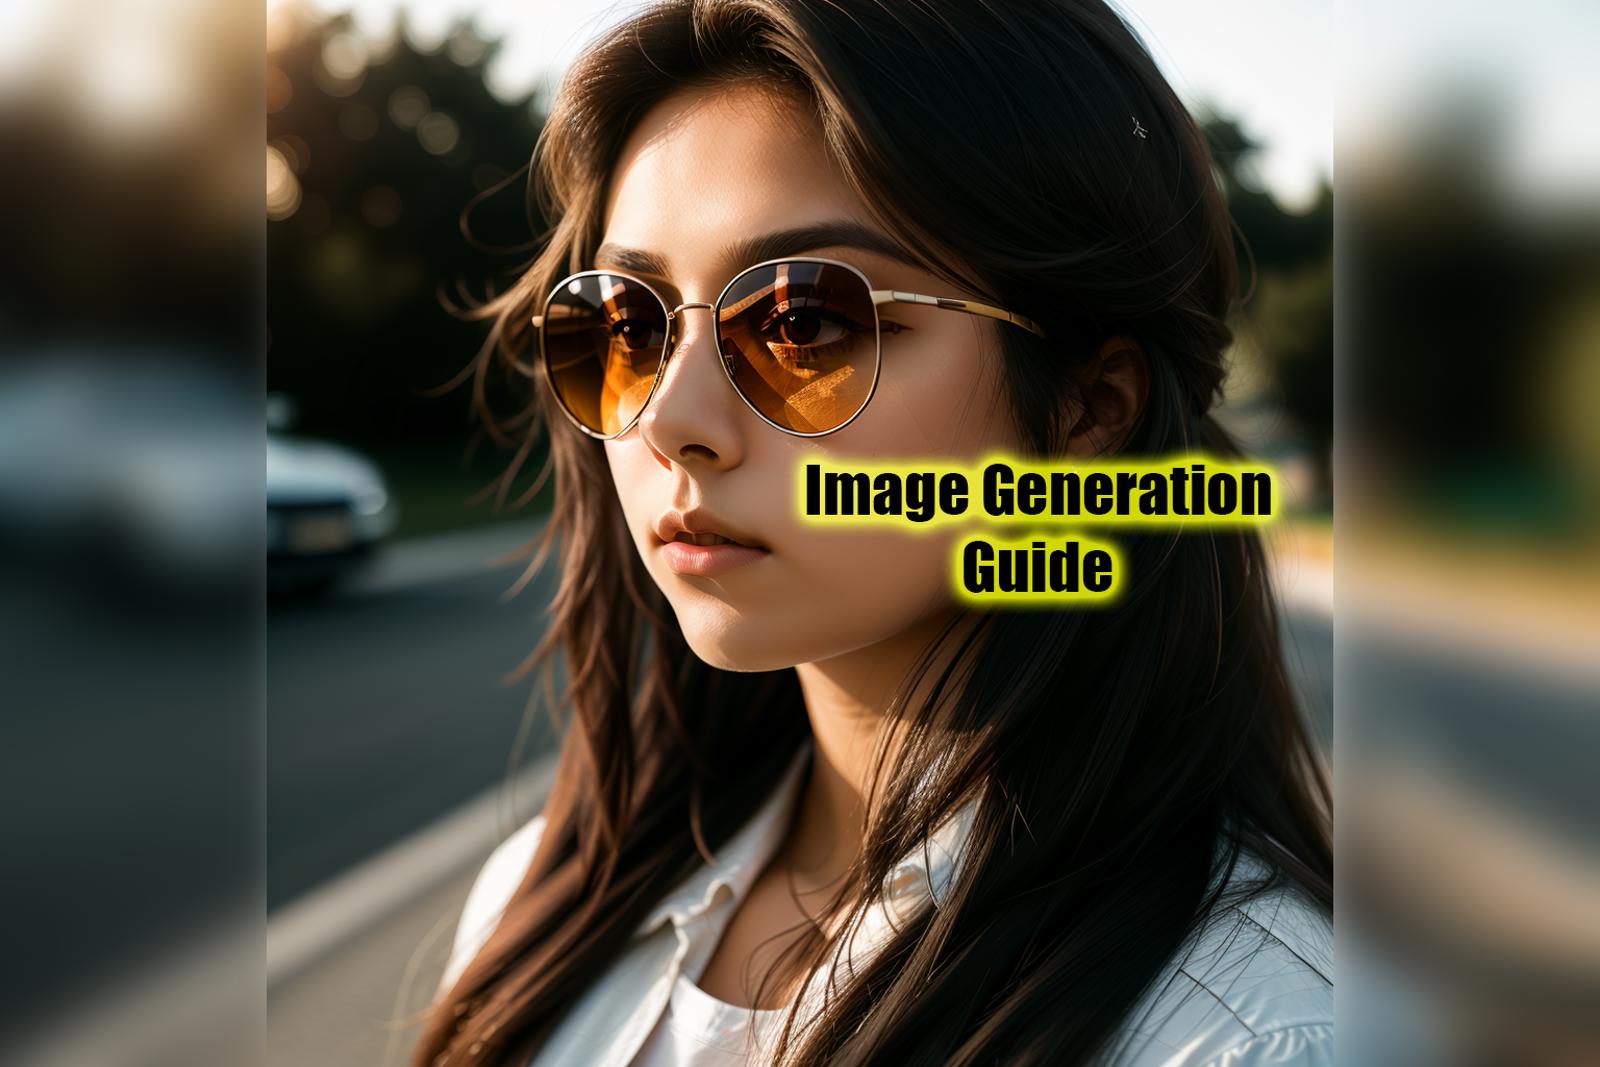 FitCorder's Guide to Image Generation. Part 1